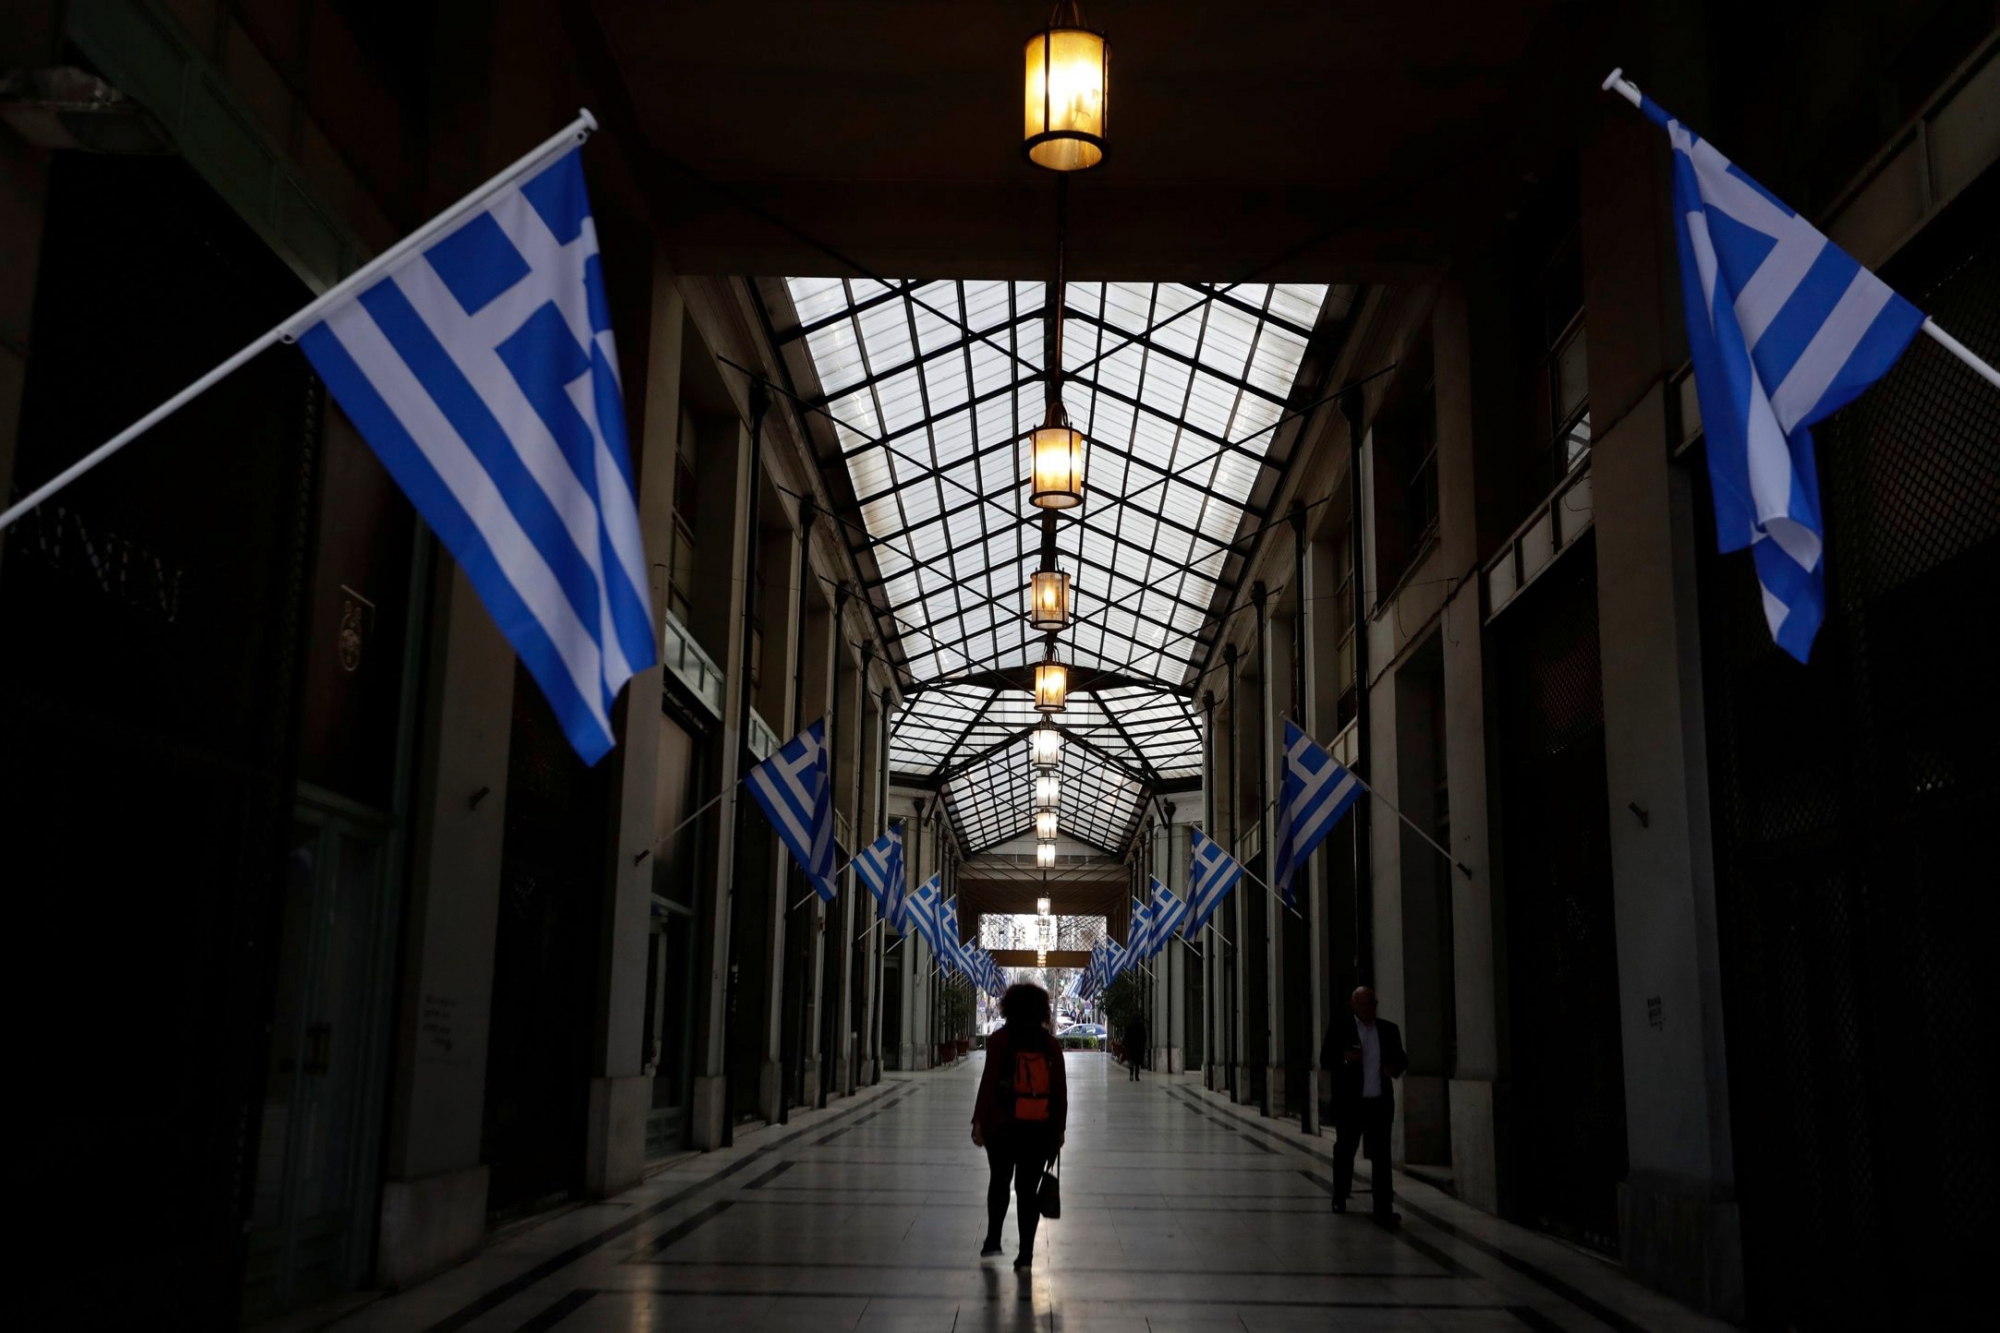 In this photo taken on Wednesday, March 22, 2017 a woman passes a shopping arcade with Greek flags, where shops closed because of the crisis in central Athens. Over the past seven years, austerity has left visible scars in GreeceÄôs capital. A walk around Athens reveals more homeless than ever despite some signs of a rosier economic outlook. Thousands of shops, mostly small businesses, are shuttered here and across the country. In what used to be a busy shopping arcade, closed stores are padlocked against a backdrop of hanging Greek flags. (AP Photo/Thanassis Stavrakis) GREECE AUSTERITY PHOTO GALLERY